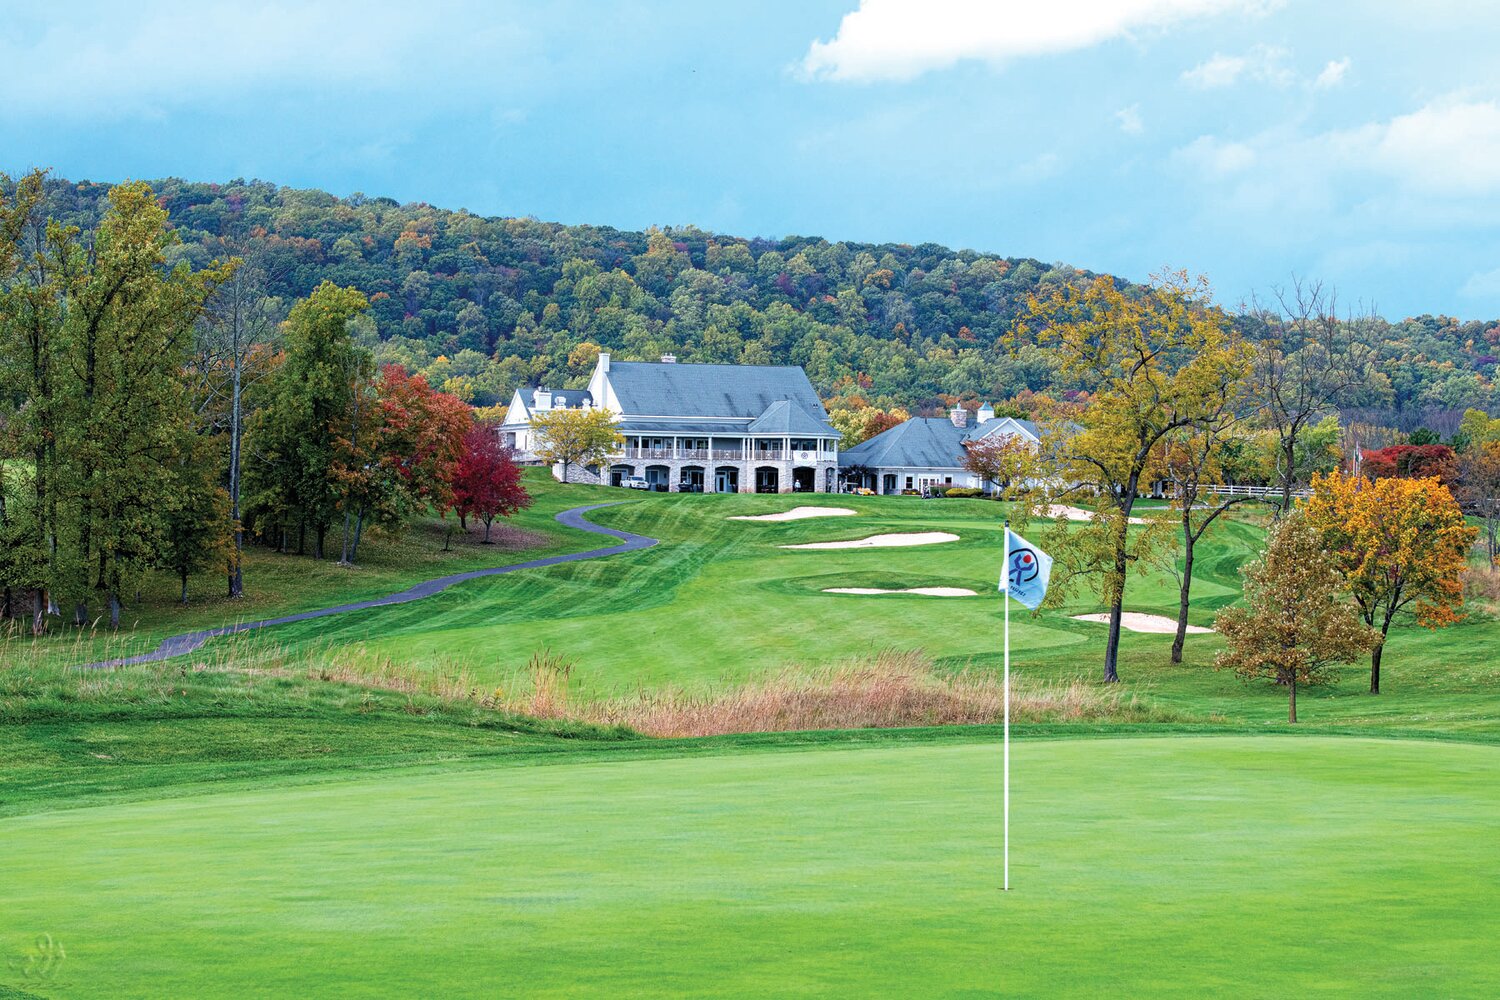 A view of the Stanton Ridge Golf & Country Club course and clubhouse, which is set to host the Links for Lex Golf Outing and Dinner Sept. 18.